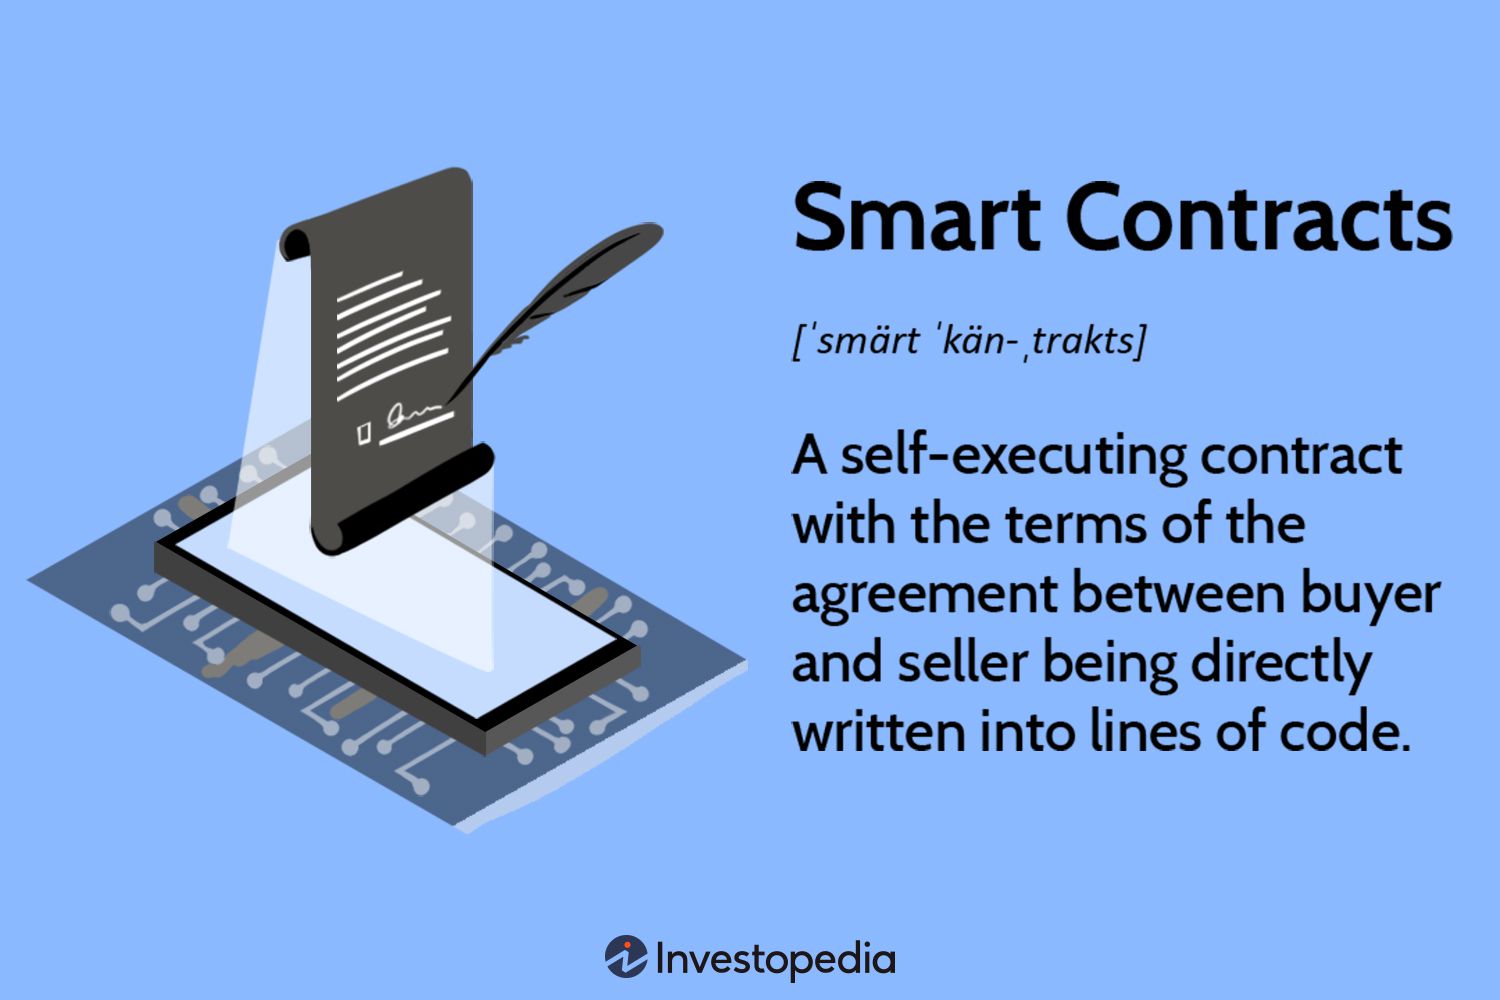 Top 3 Smart Contracts Keypoints